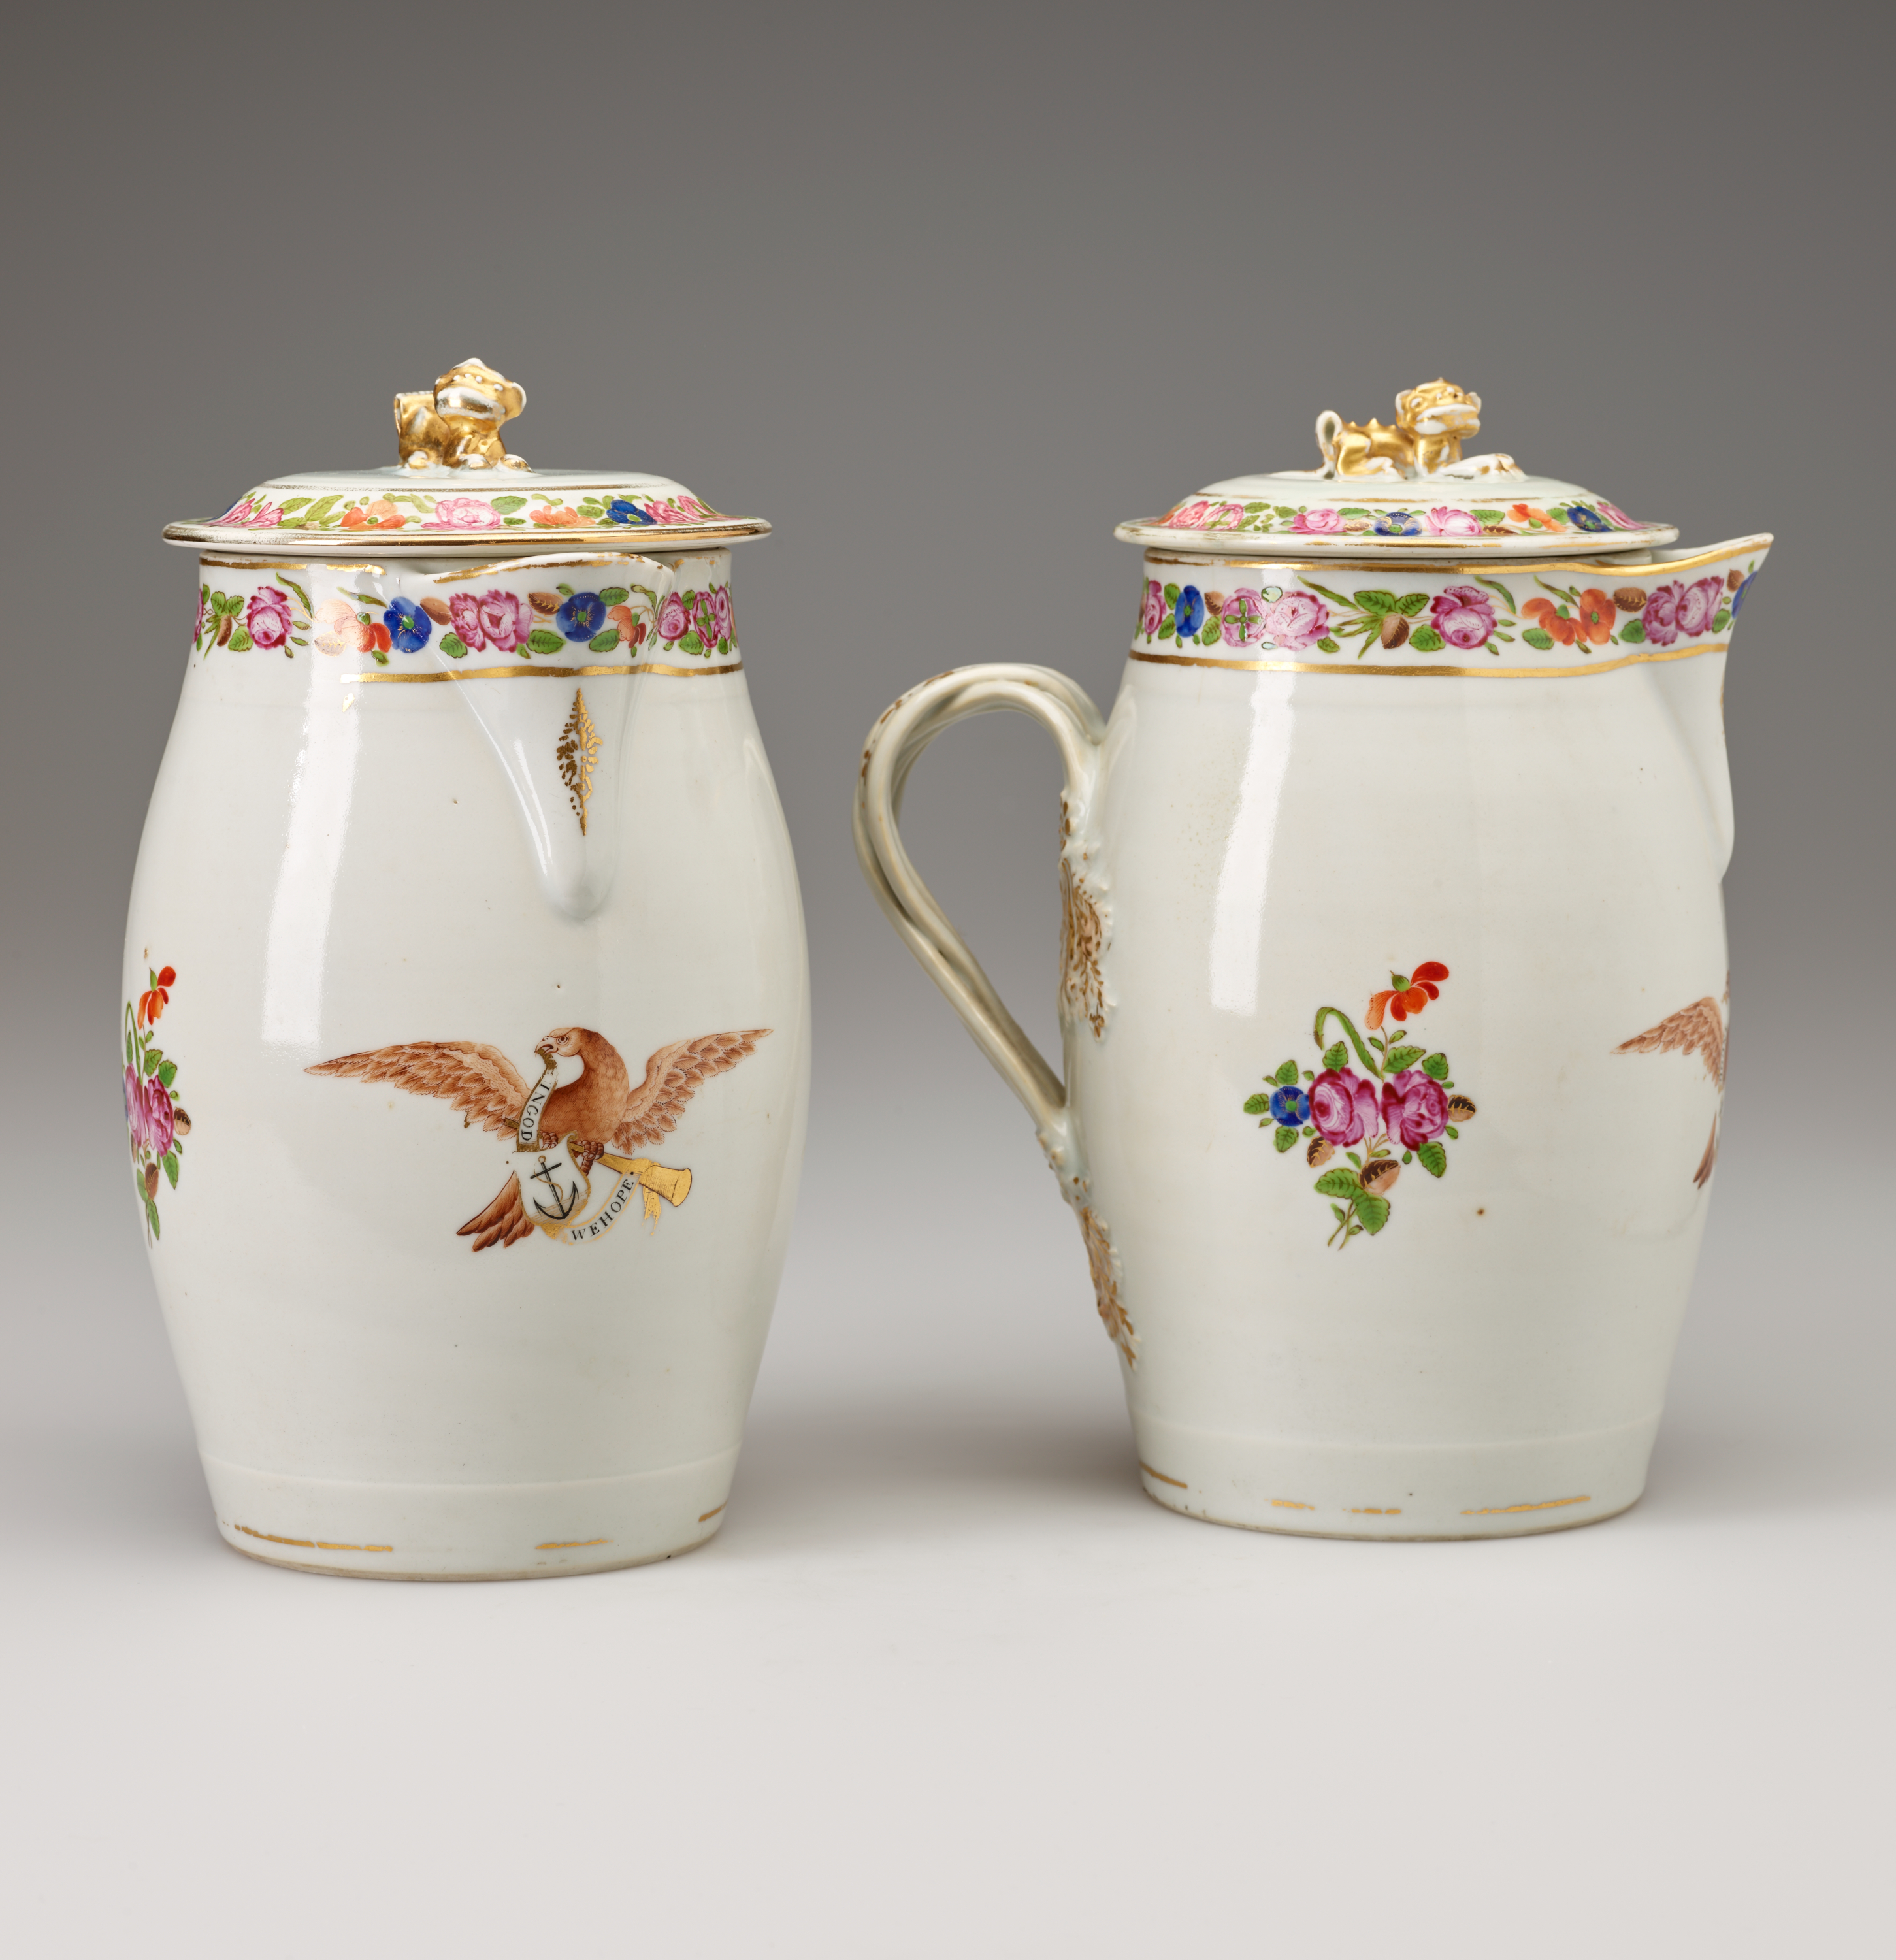 /Two%20cream%20colored%20lidded%20vessels%20with%20decorations%20of%20flowers%20and%20eagles.%20